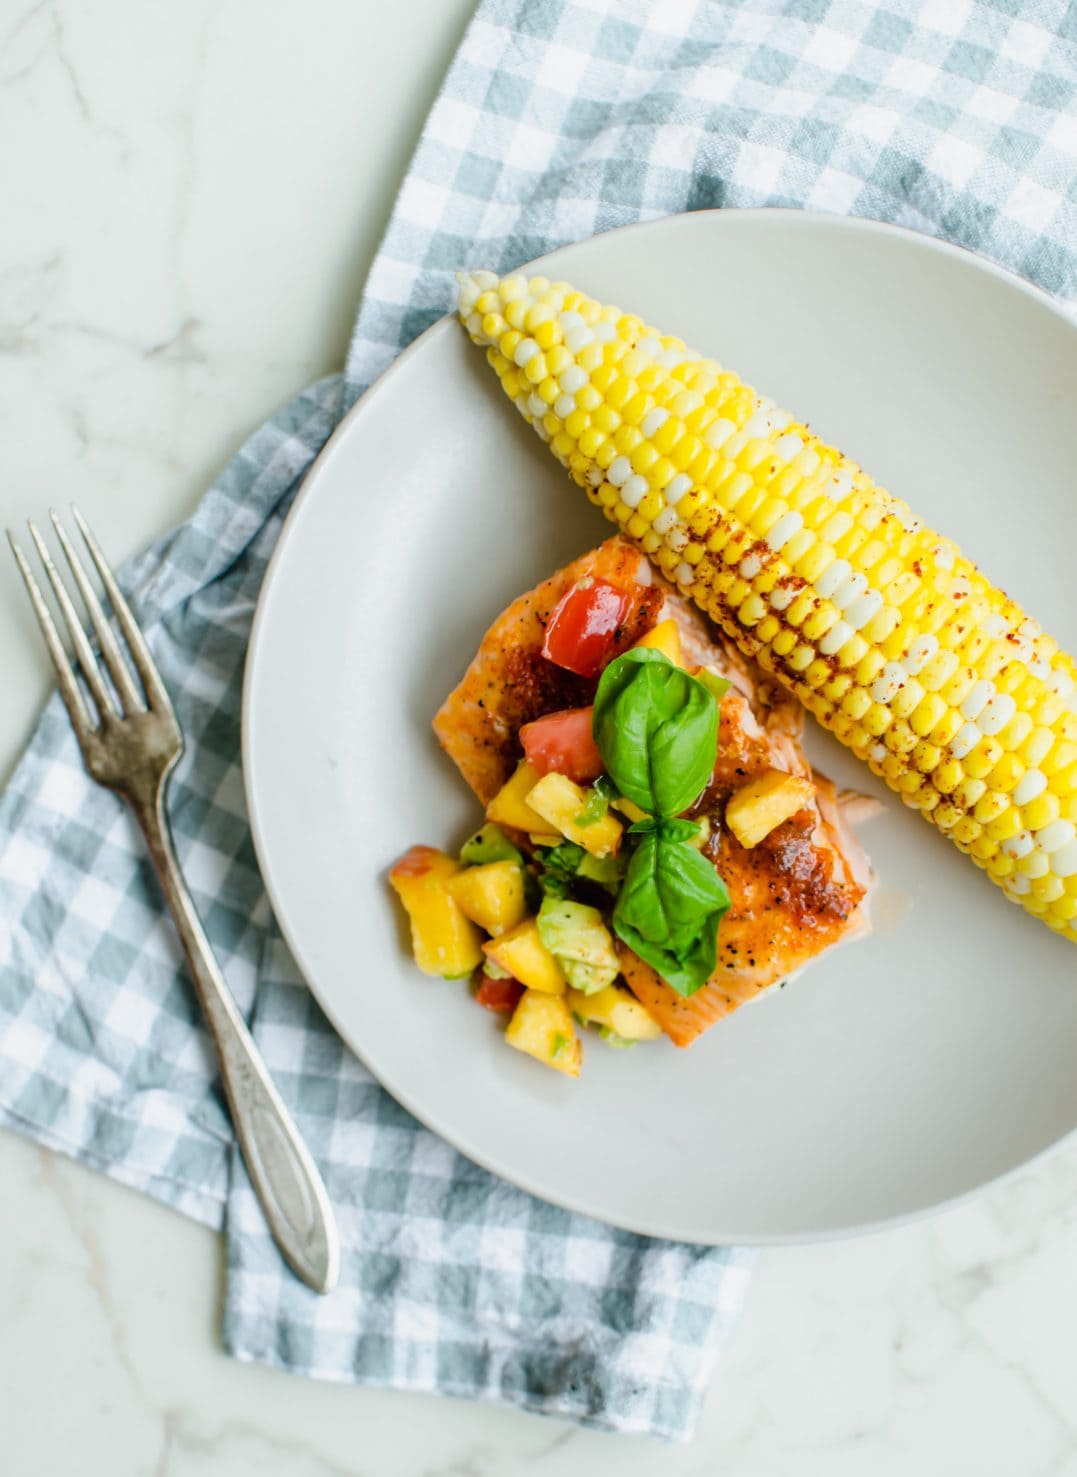 A piece of BBQ salmon on a beige plate topped with peach salsa and an ear of roasted corn on the side.